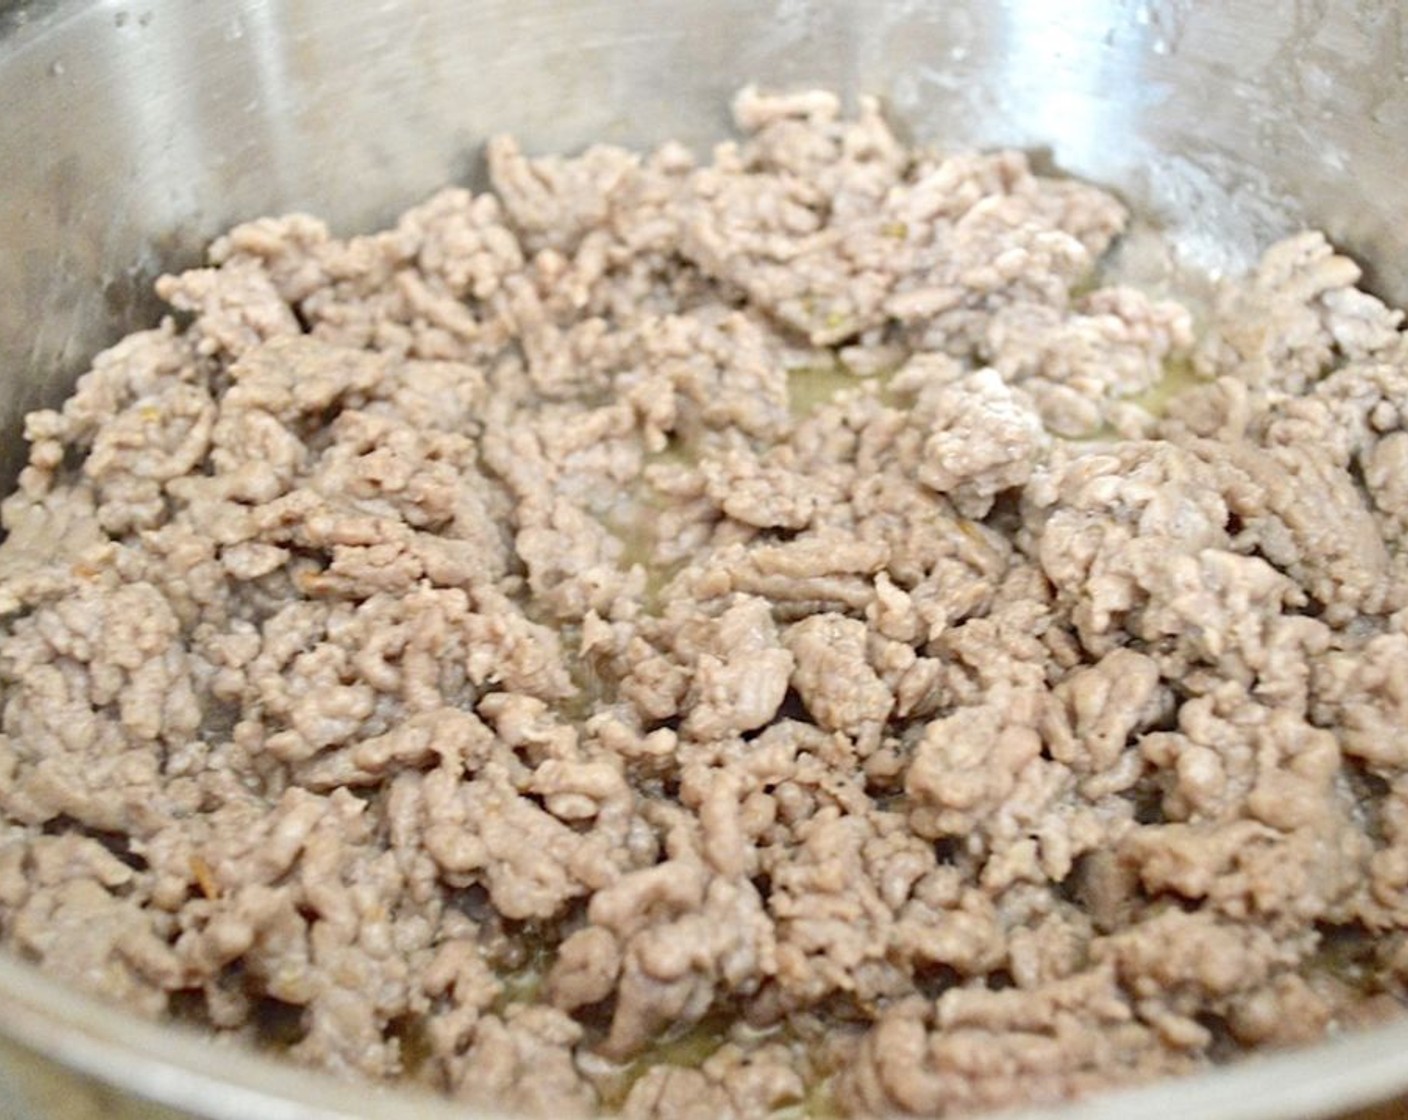 step 1 Get a large pot of water on to boil for the pasta. Then get out a large, deep skillet and heat the Olive Oil (1 dash) in it over medium-high heat. Brown the Ground Sweet Italian Sausage (1 lb) in it until cooked through completely. Transfer it to a plate.